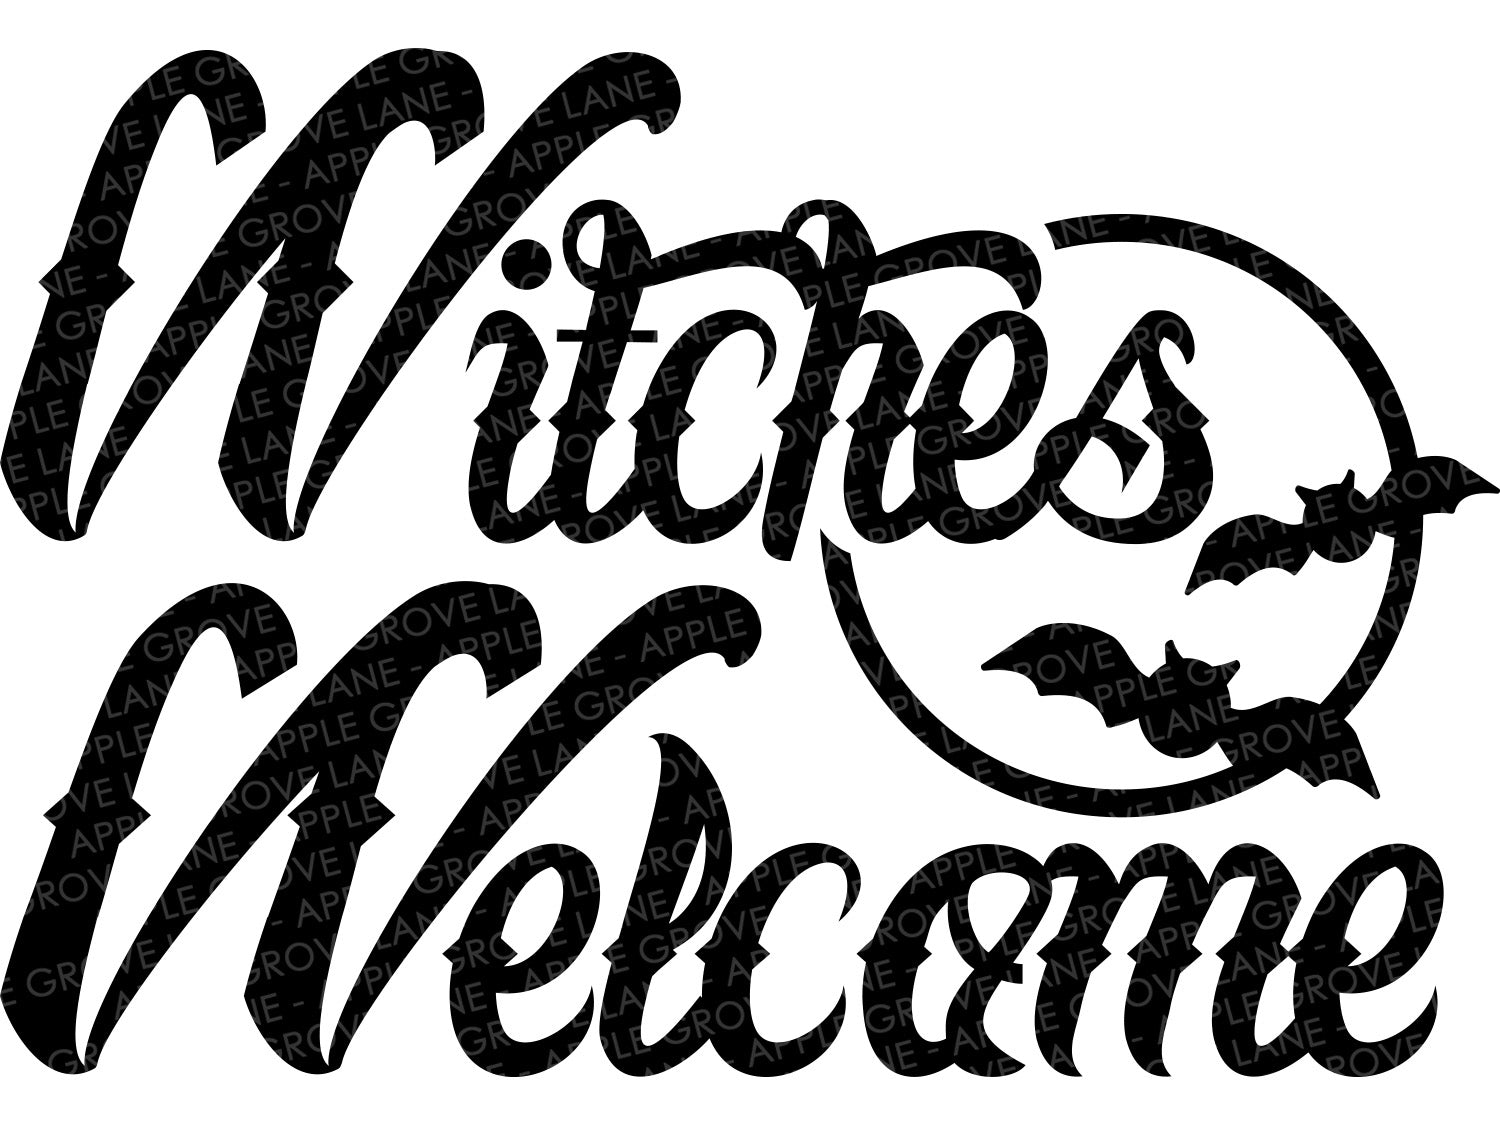 Halloween Svg - Witches Welcome Svg - Halloween Witch Svg - Halloween Witch Svg - Halloween Welcome Svg - Halloween Welcome Sign - Door Mat